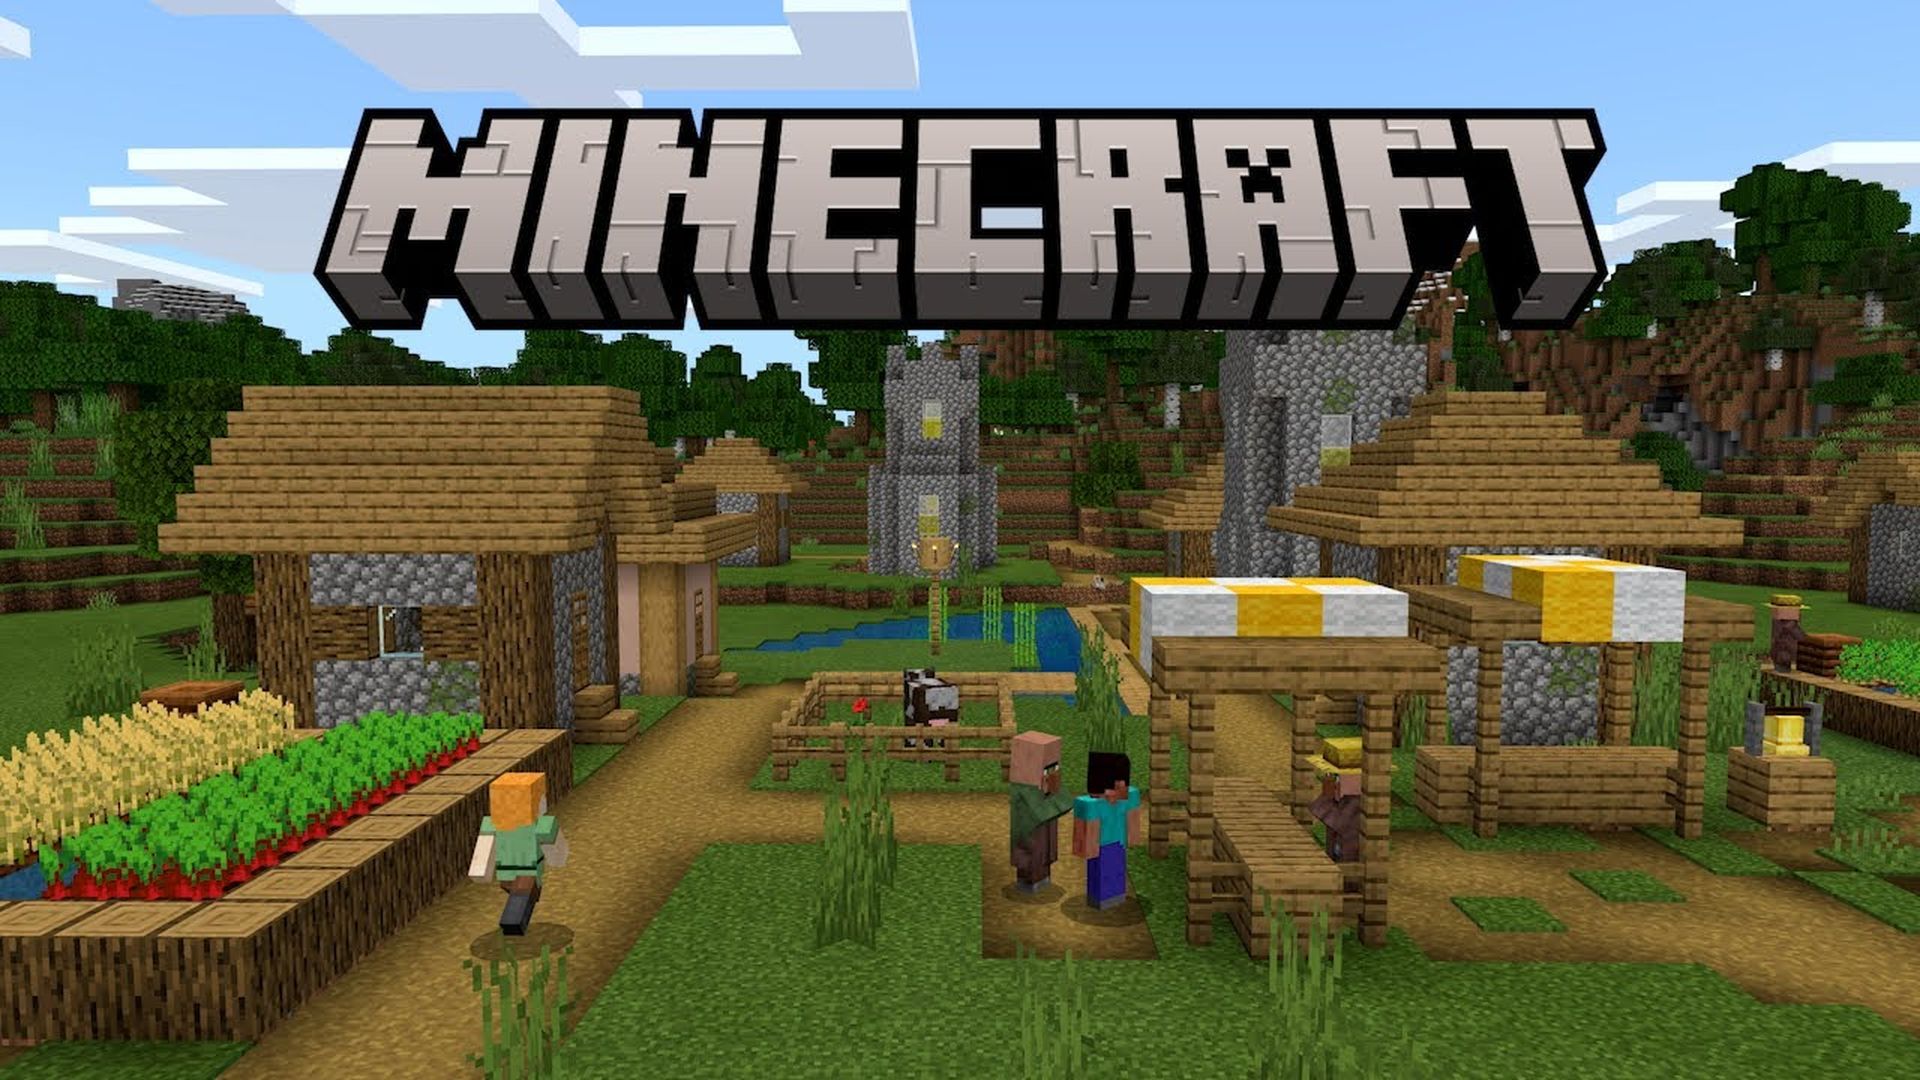 How to play Minecraft for free?